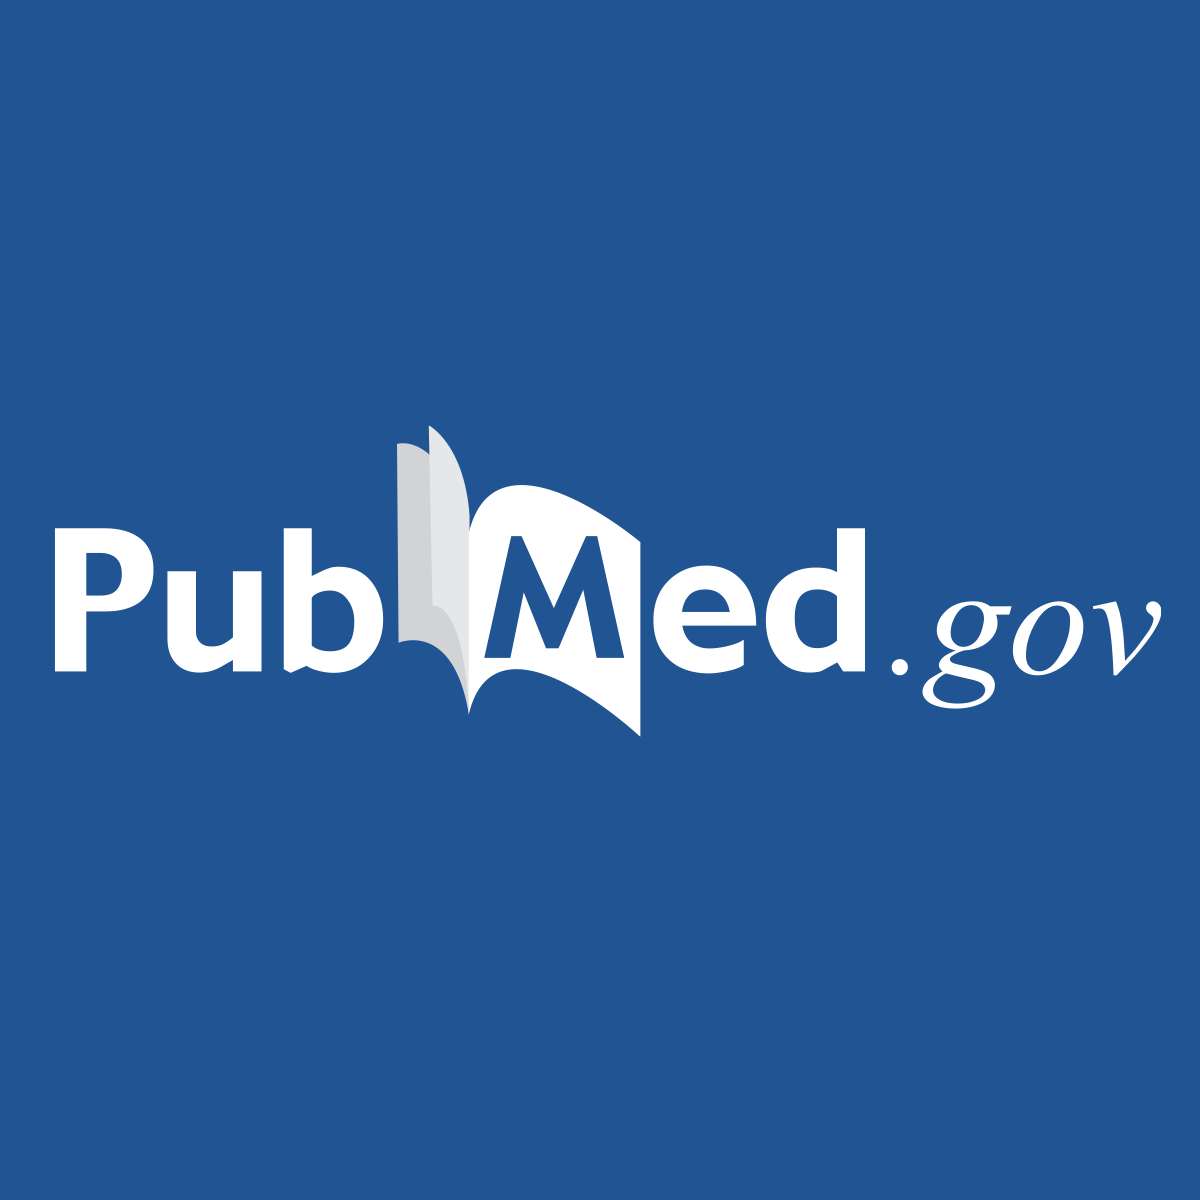 Medical specialty preferences in early medical school training in Canada - PubMed